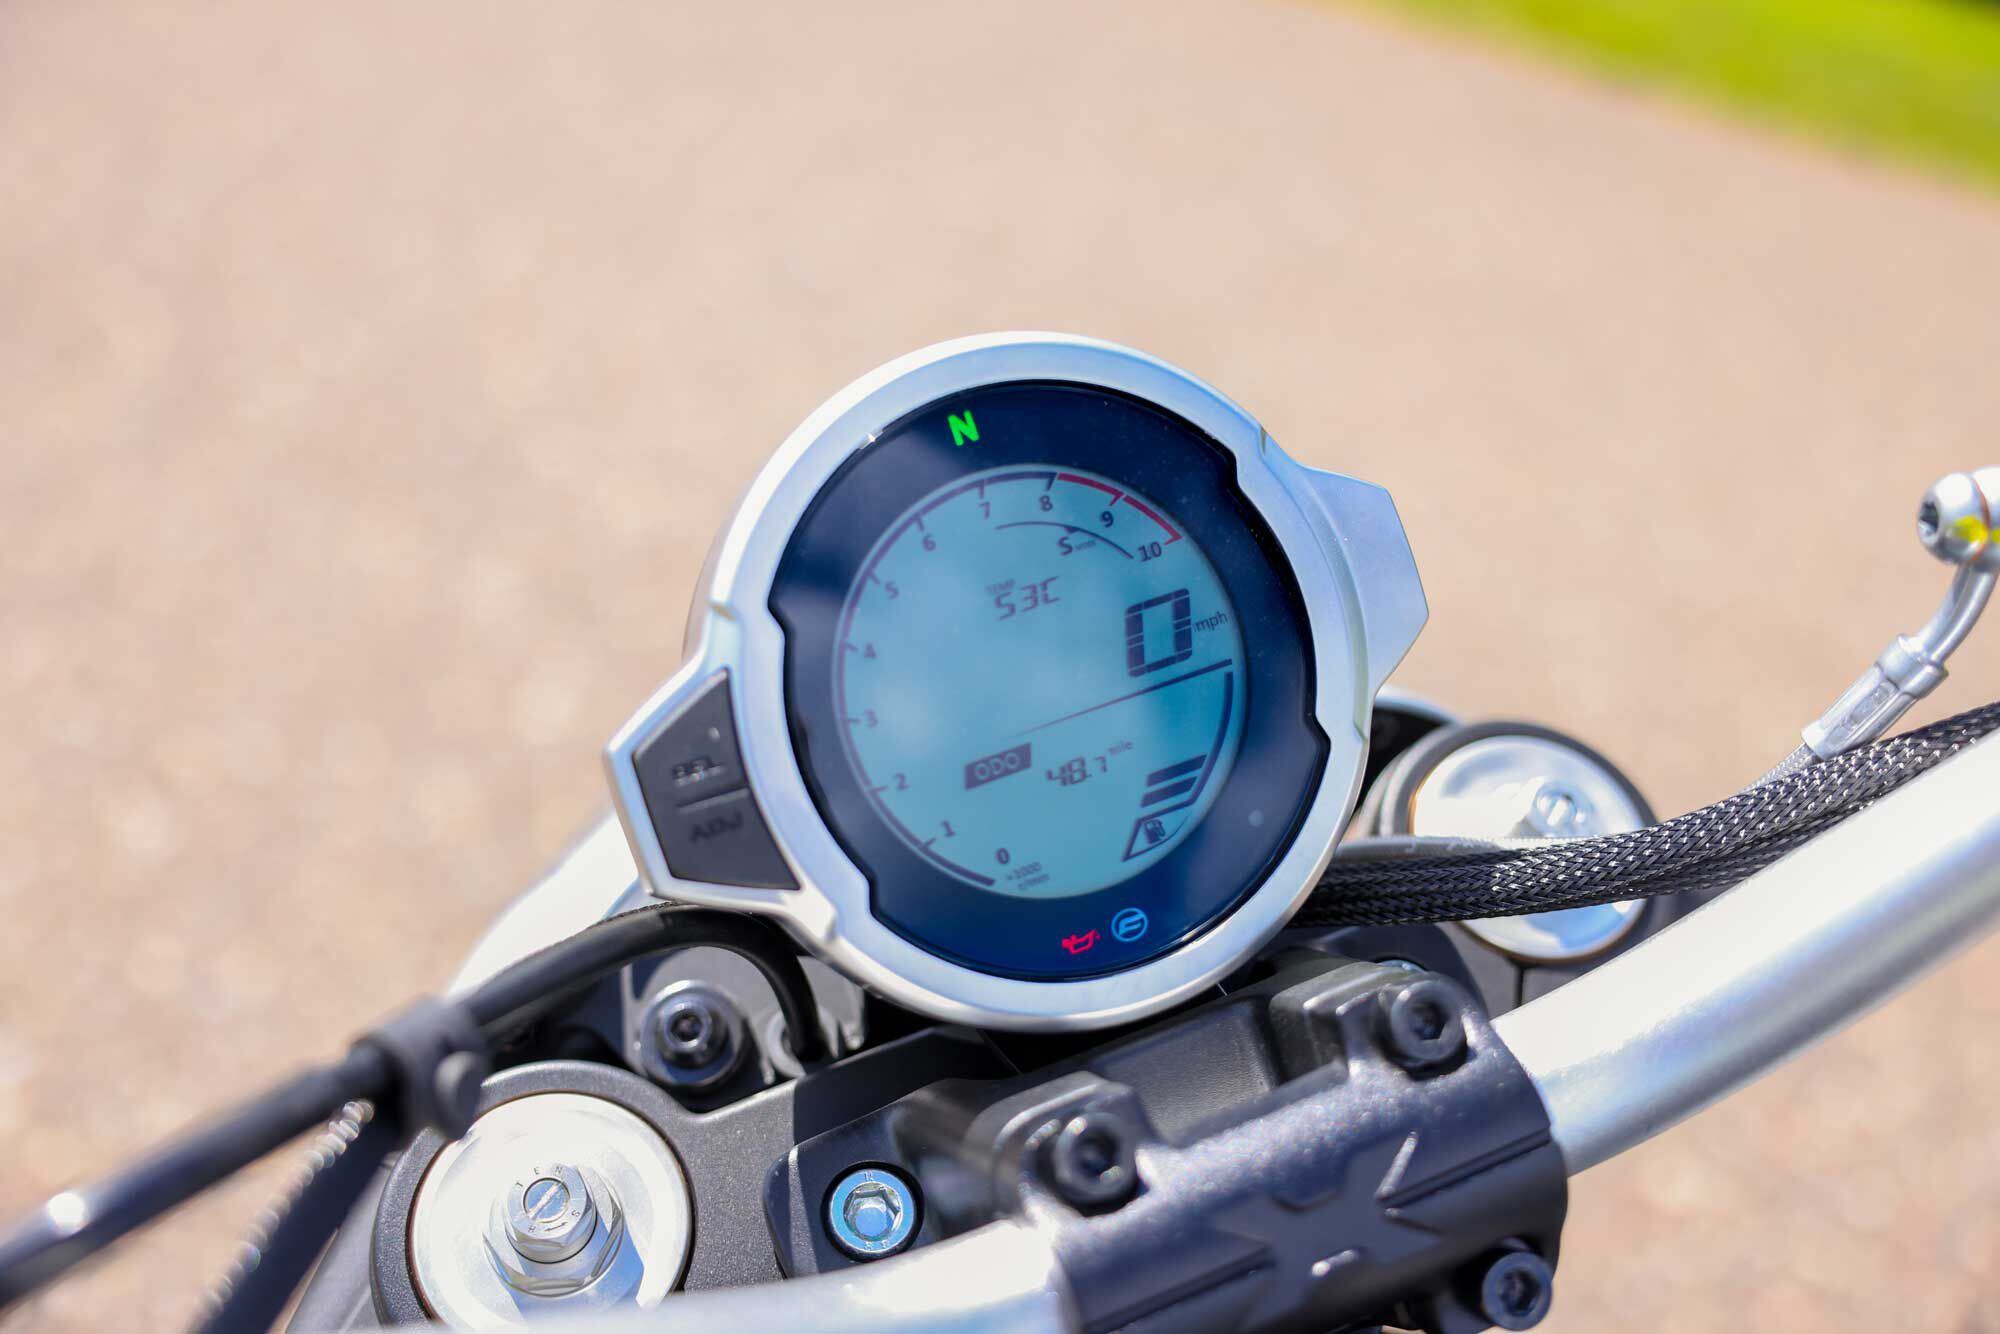 The 700CL-X Sport’s gauge cluster clearly displays what ride mode you’re in, fully in view due to the clip-ons.